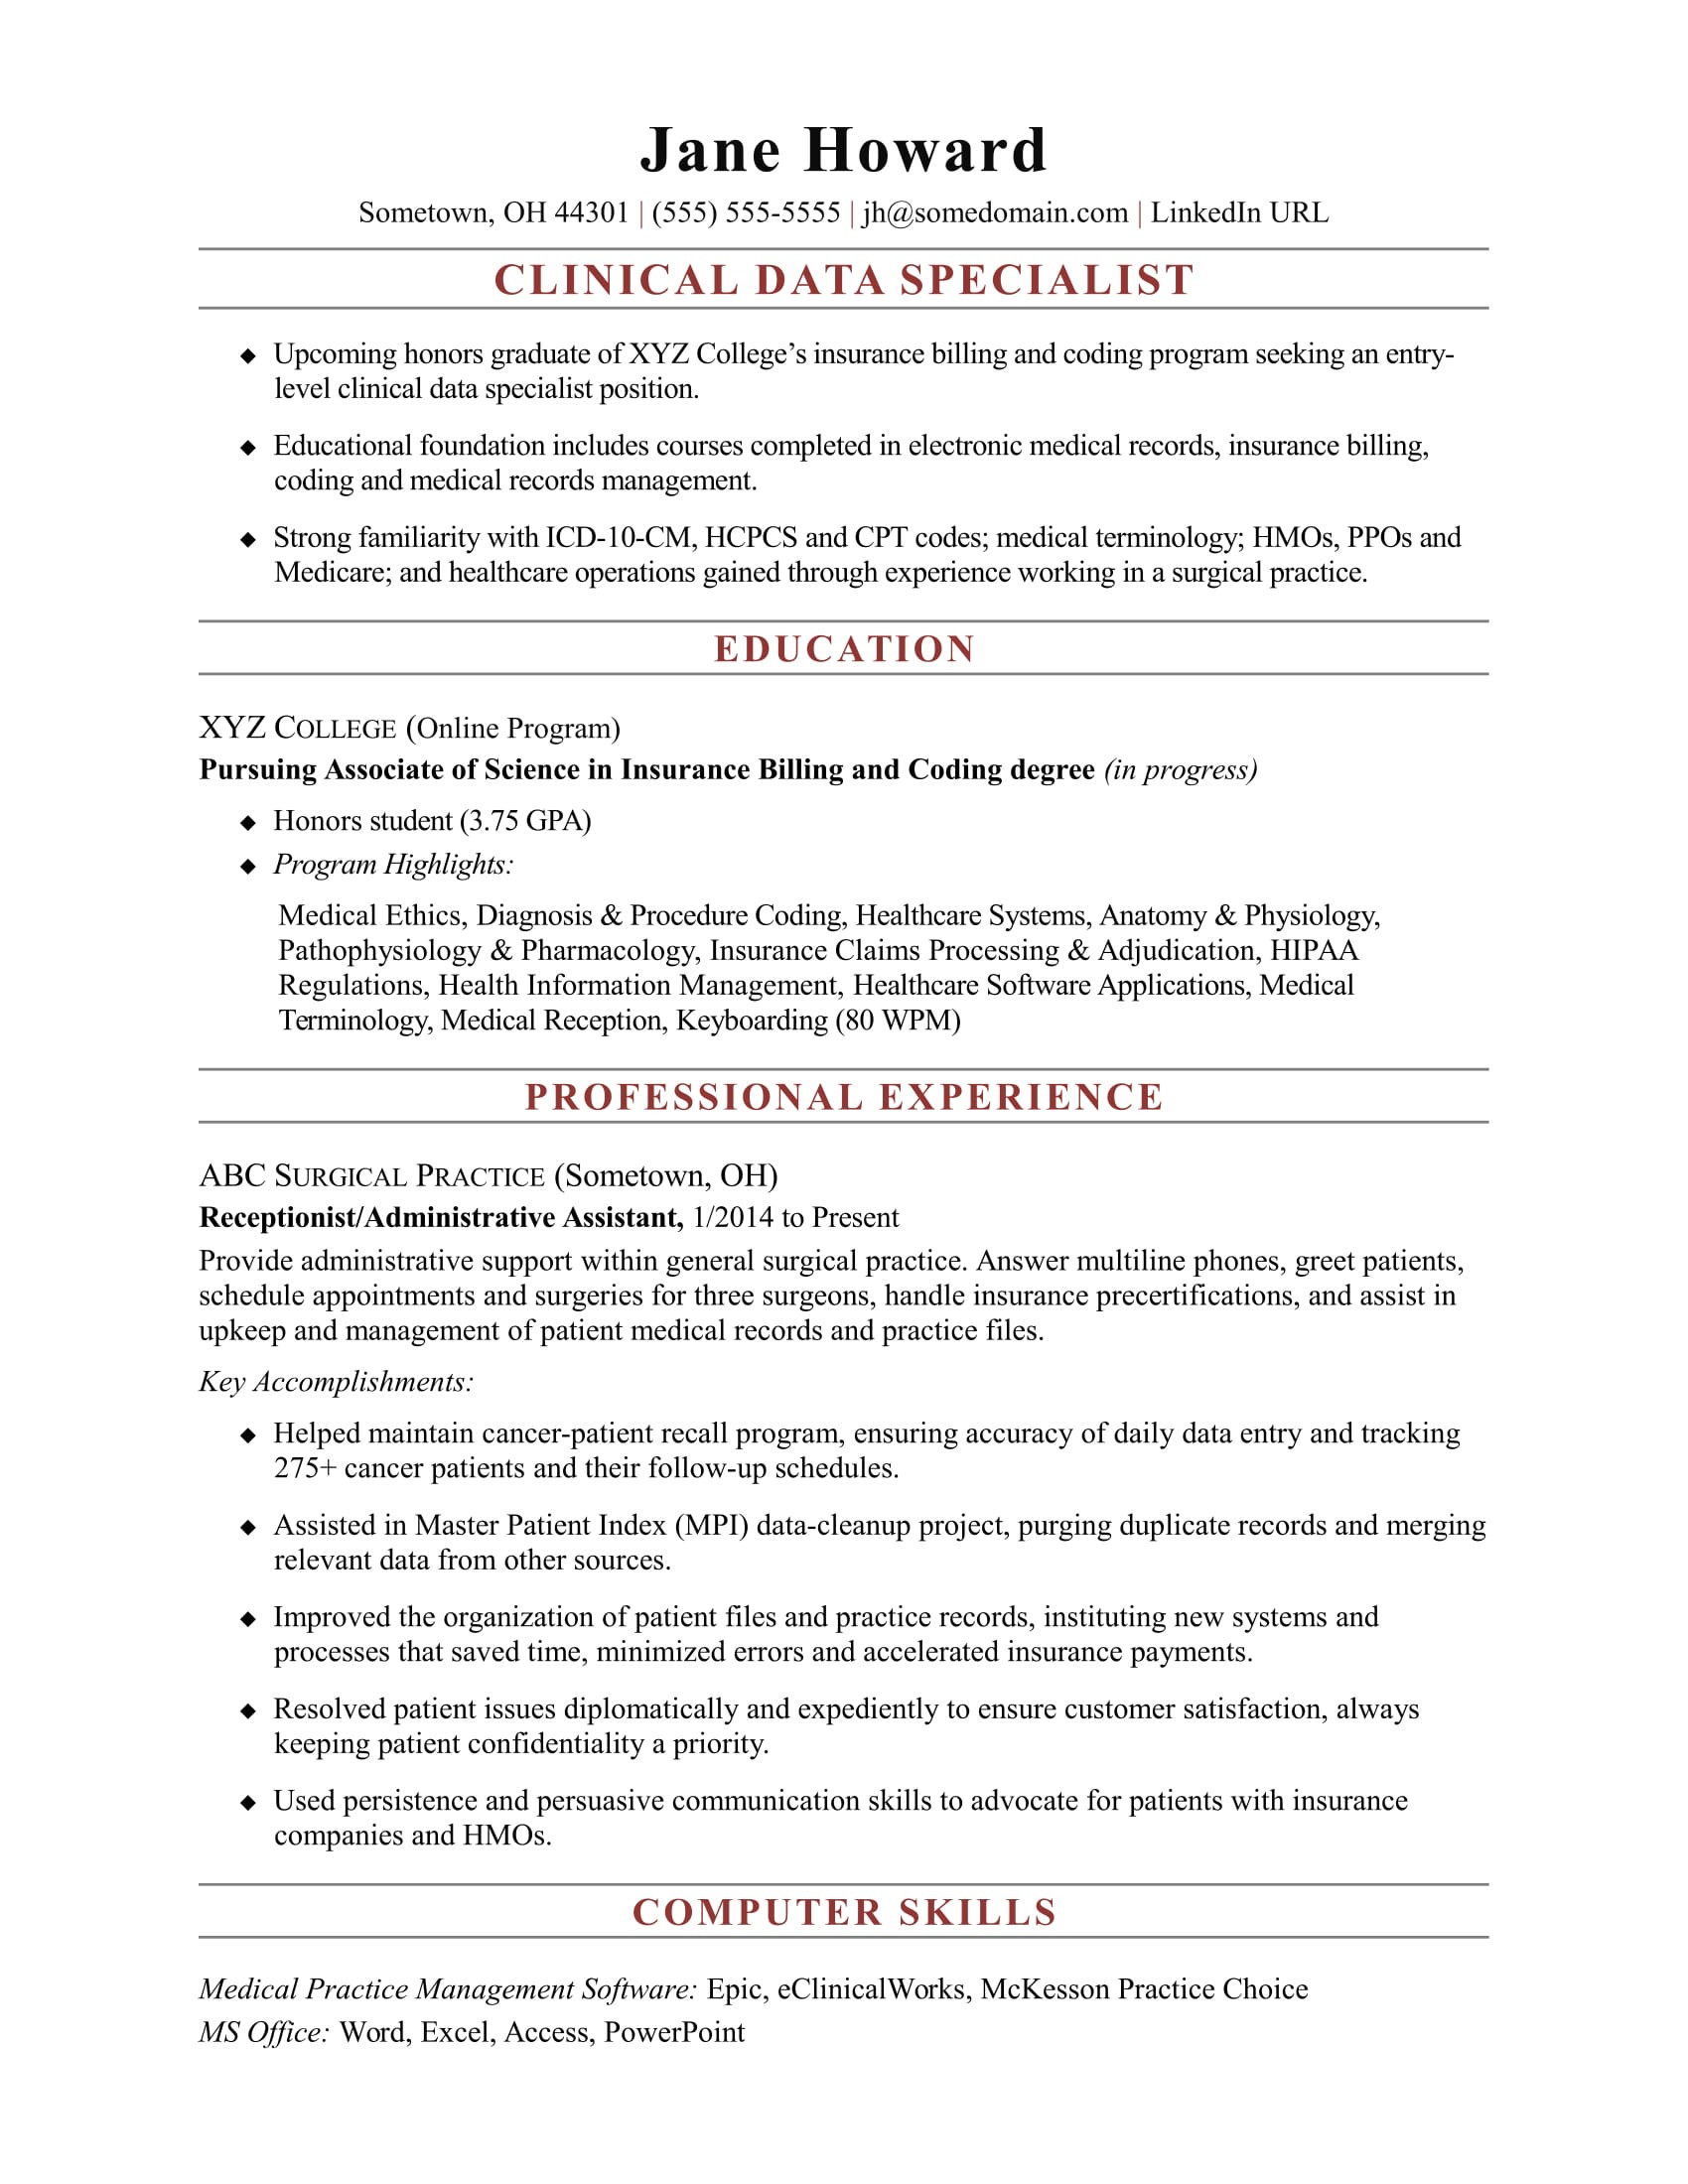 Sample Resume for Medical Billing and Coding with No Experience Entry-level Clinical Data Specialist Resume Sample Monster.com